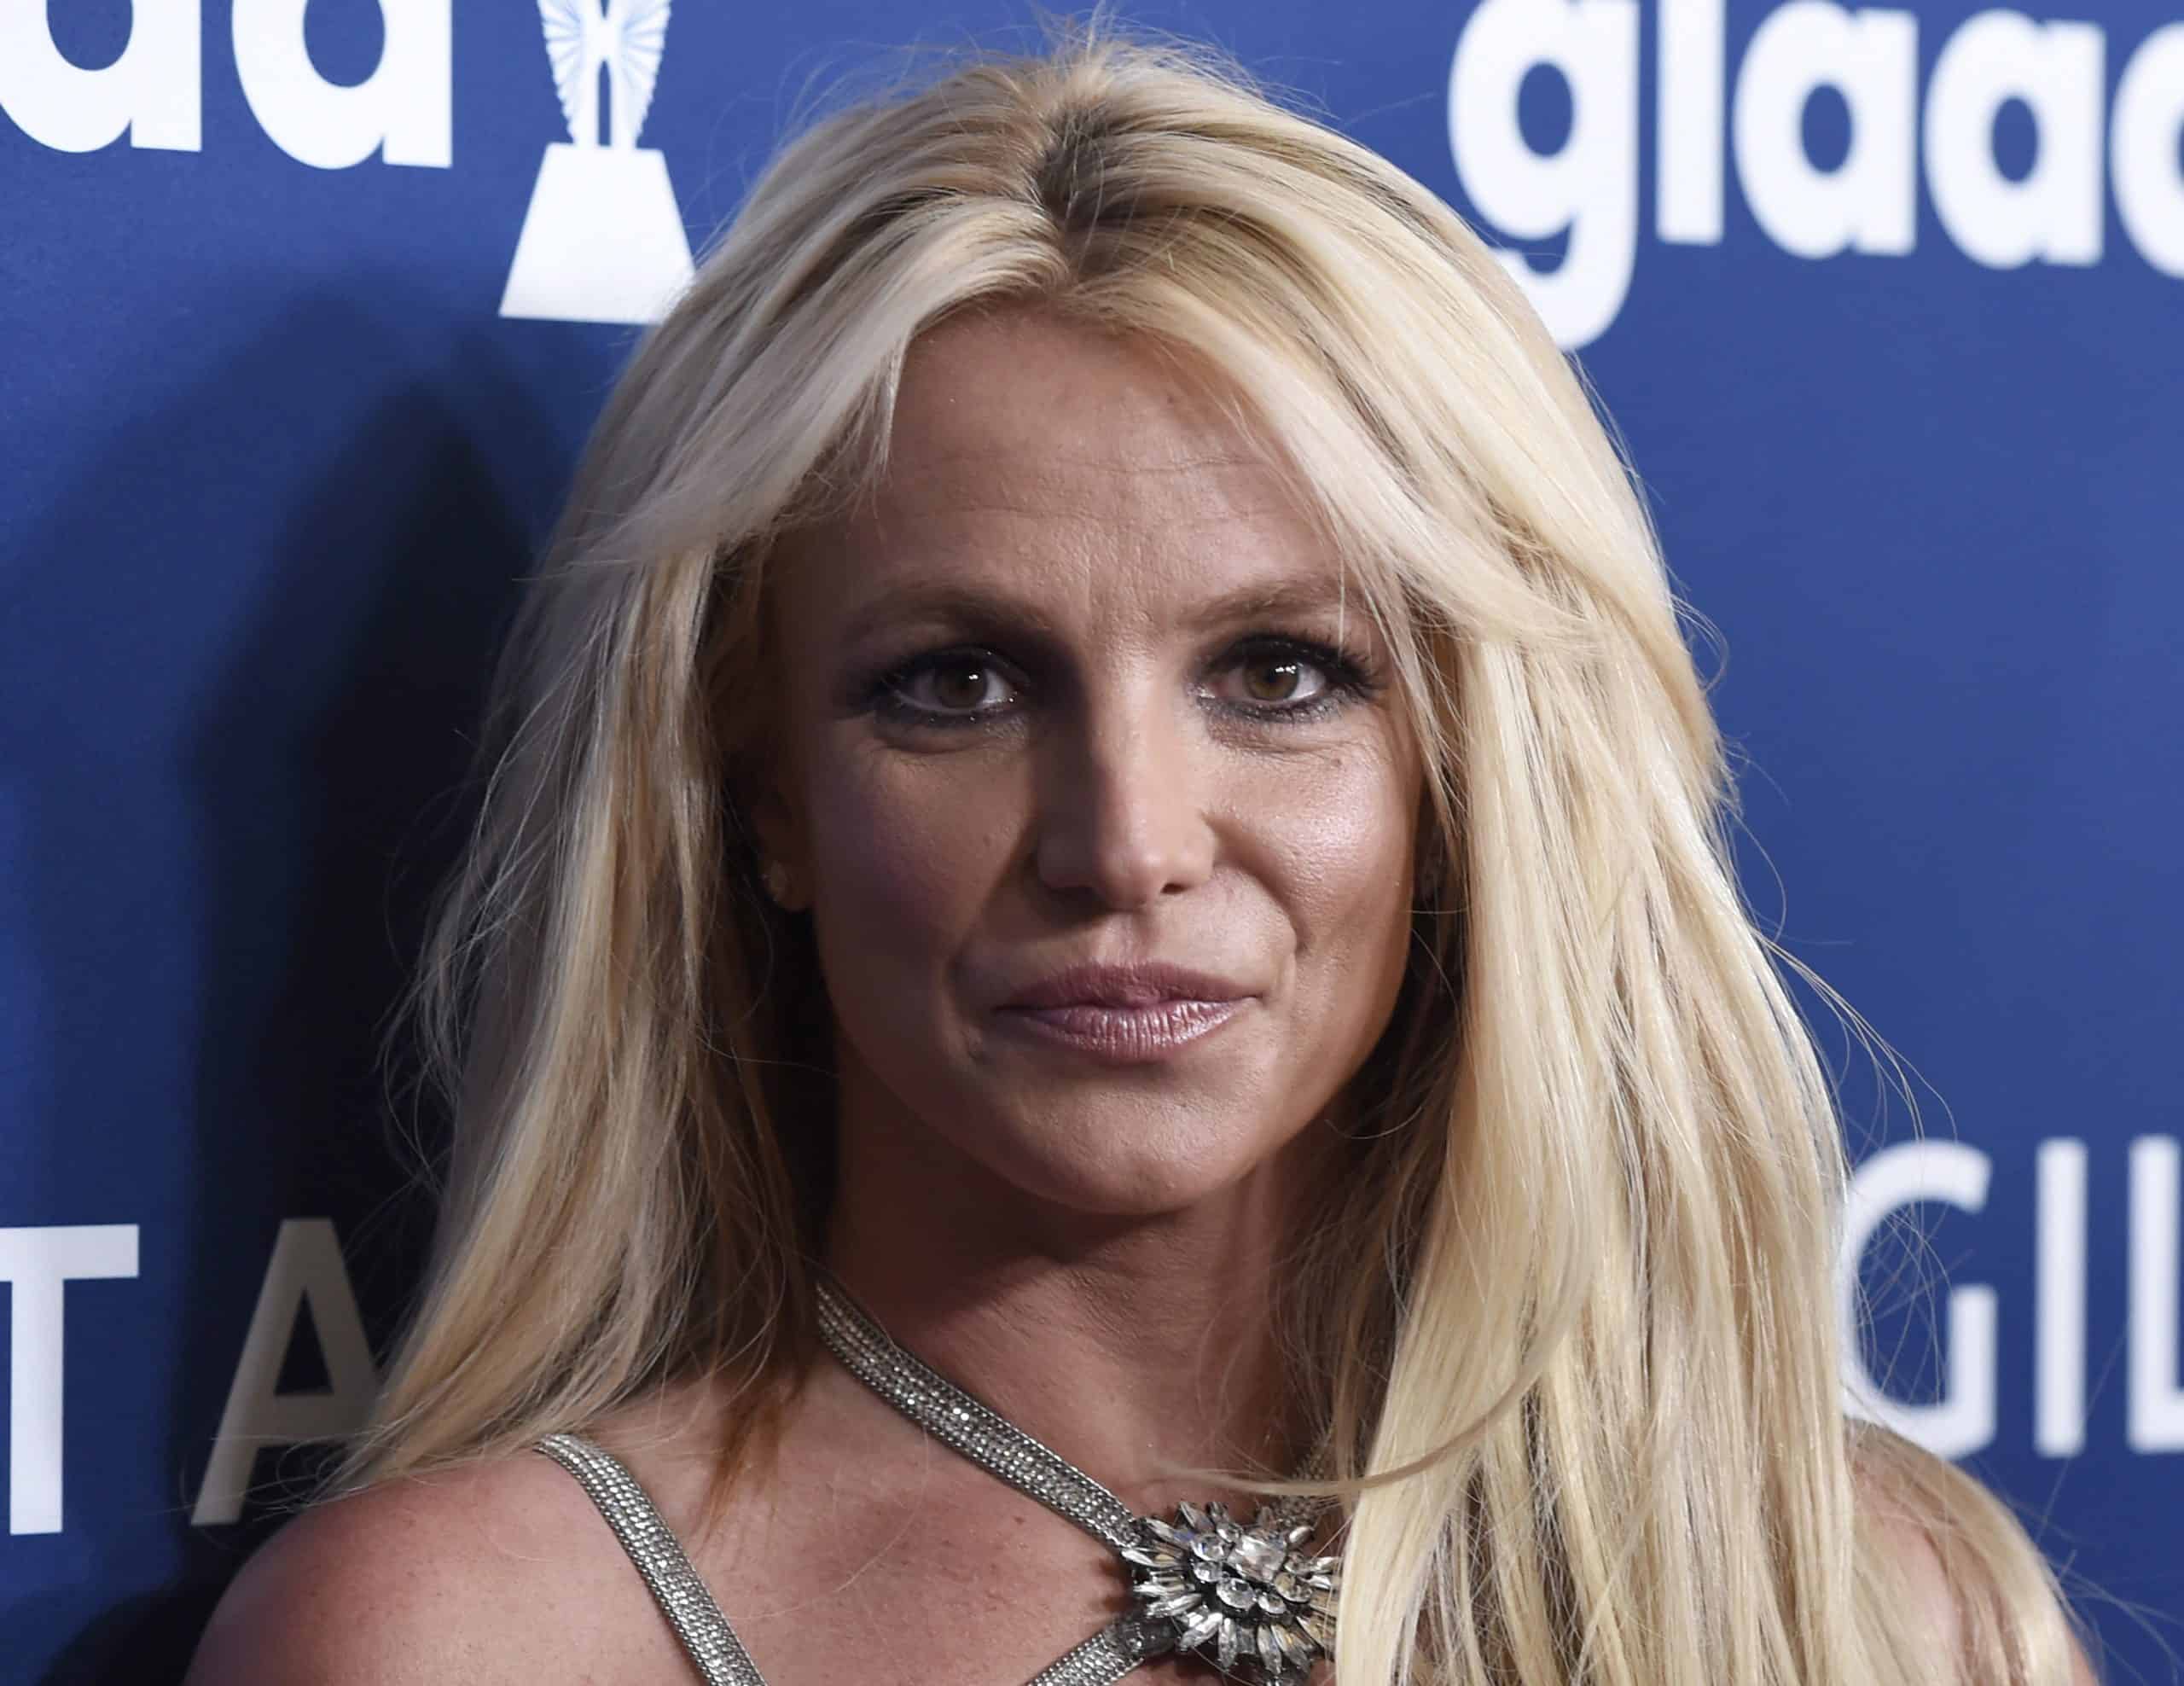 #FreeBritney: Father files to finally end singer’s conservatorship